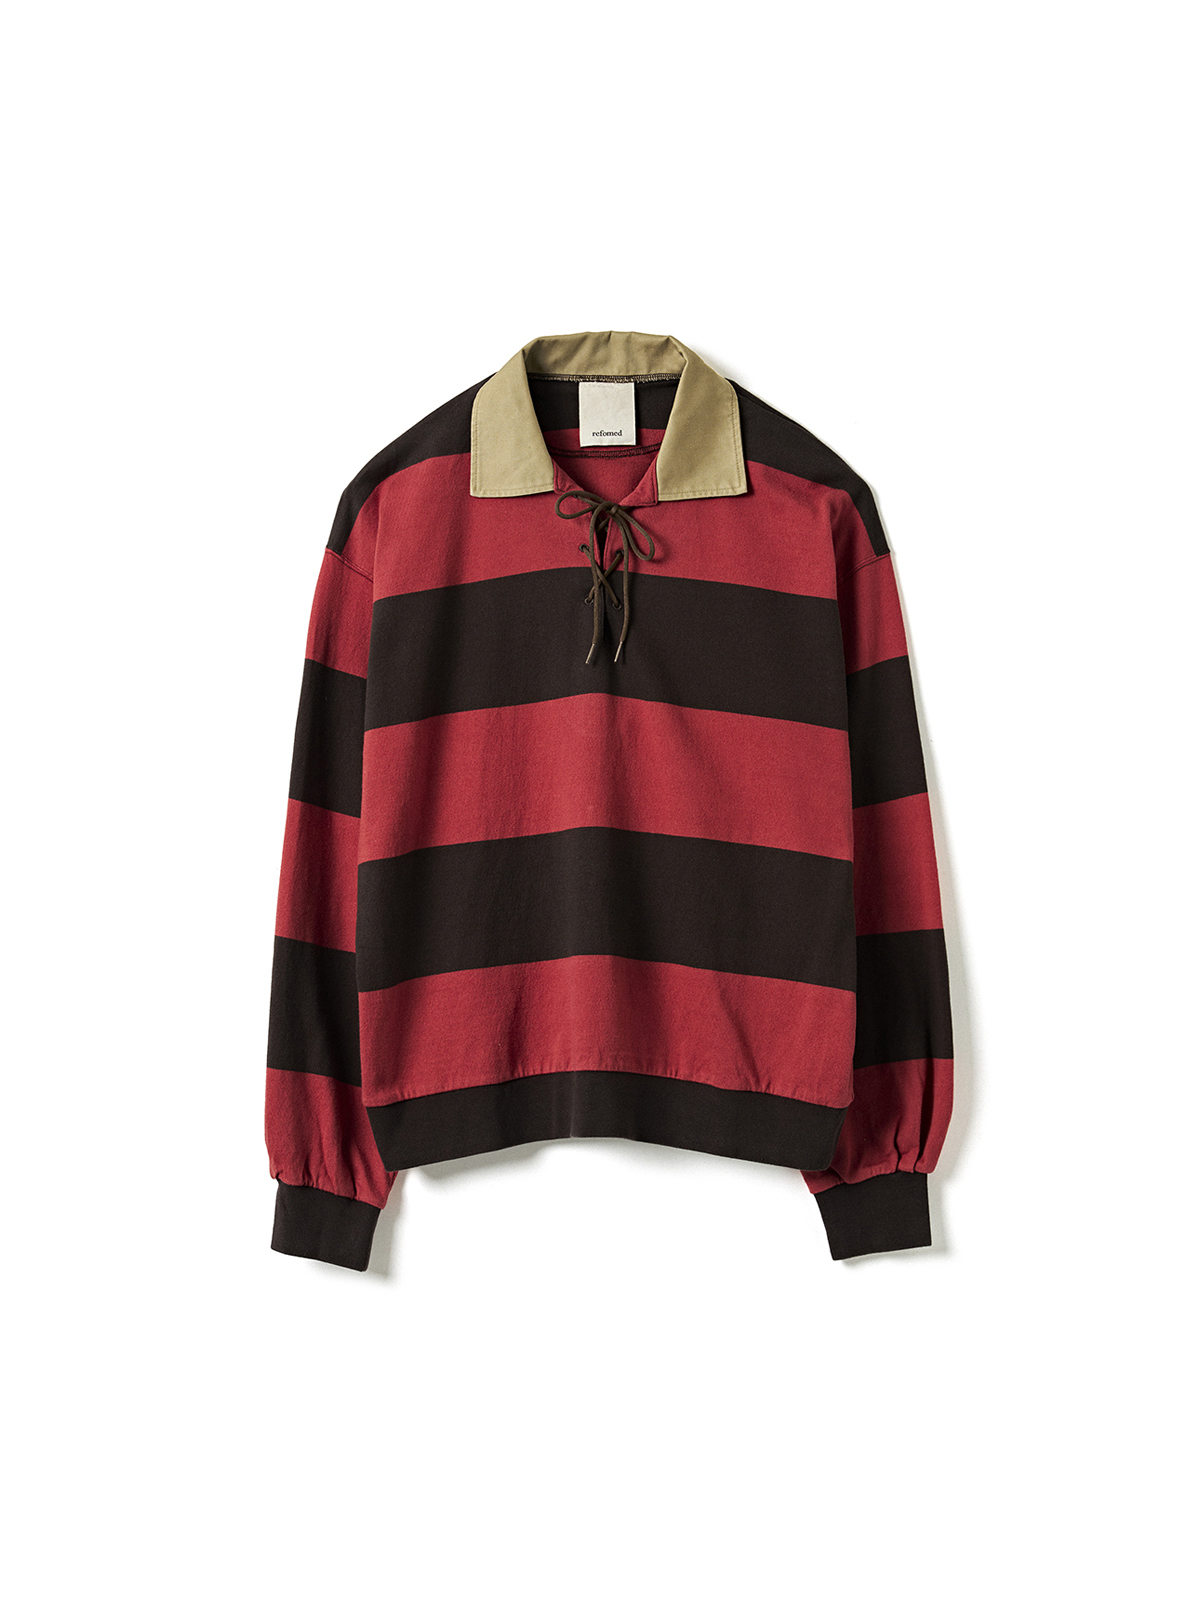 BORDER RUGBY SHIRT (RED×BROWN)